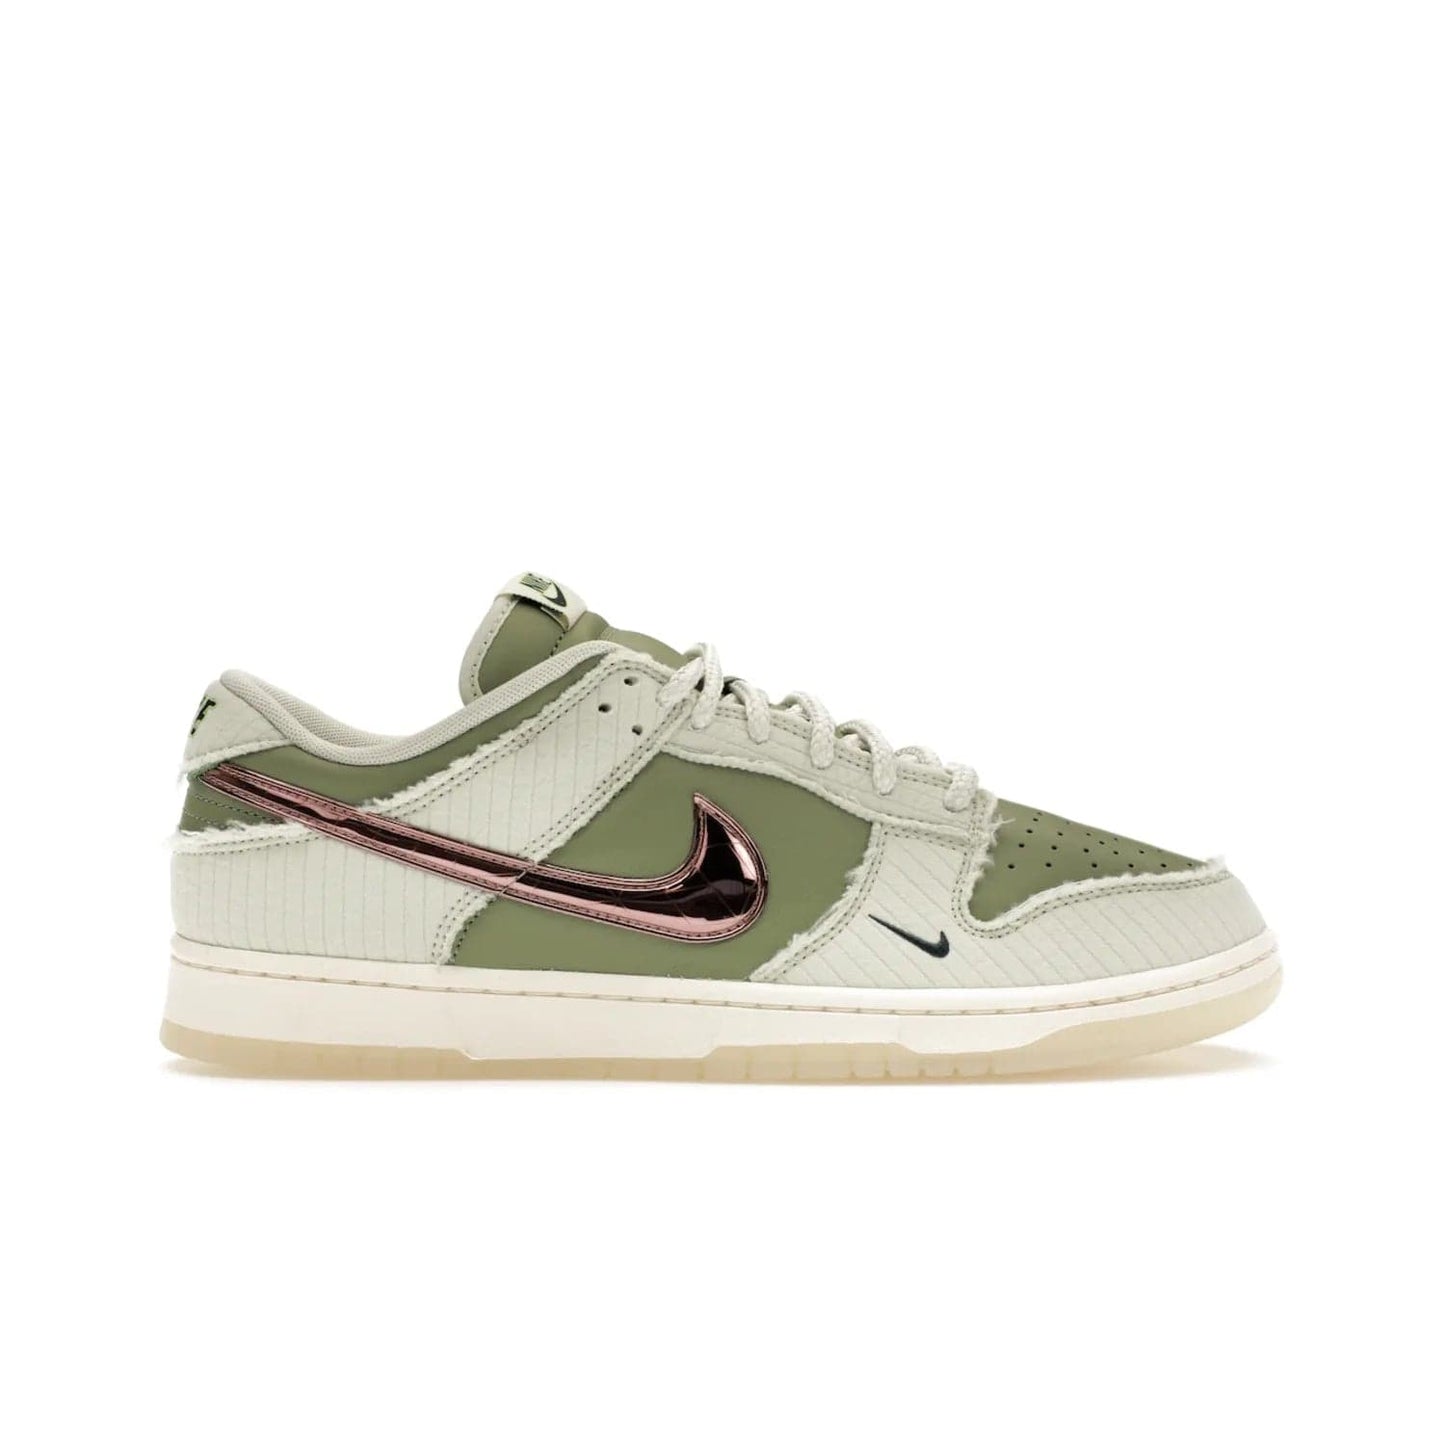 Nike Dunk Low Retro PRM Kyler Murray Be 1 of One - Image 1 - Only at www.BallersClubKickz.com - Introducing the Nike Dunk Low Retro PRM Kyler Murray "Be 1 of One"! A Sea Glass upper with Sail and Oil Green accents, finished with Rose Gold accents. Drop date: November 10th.